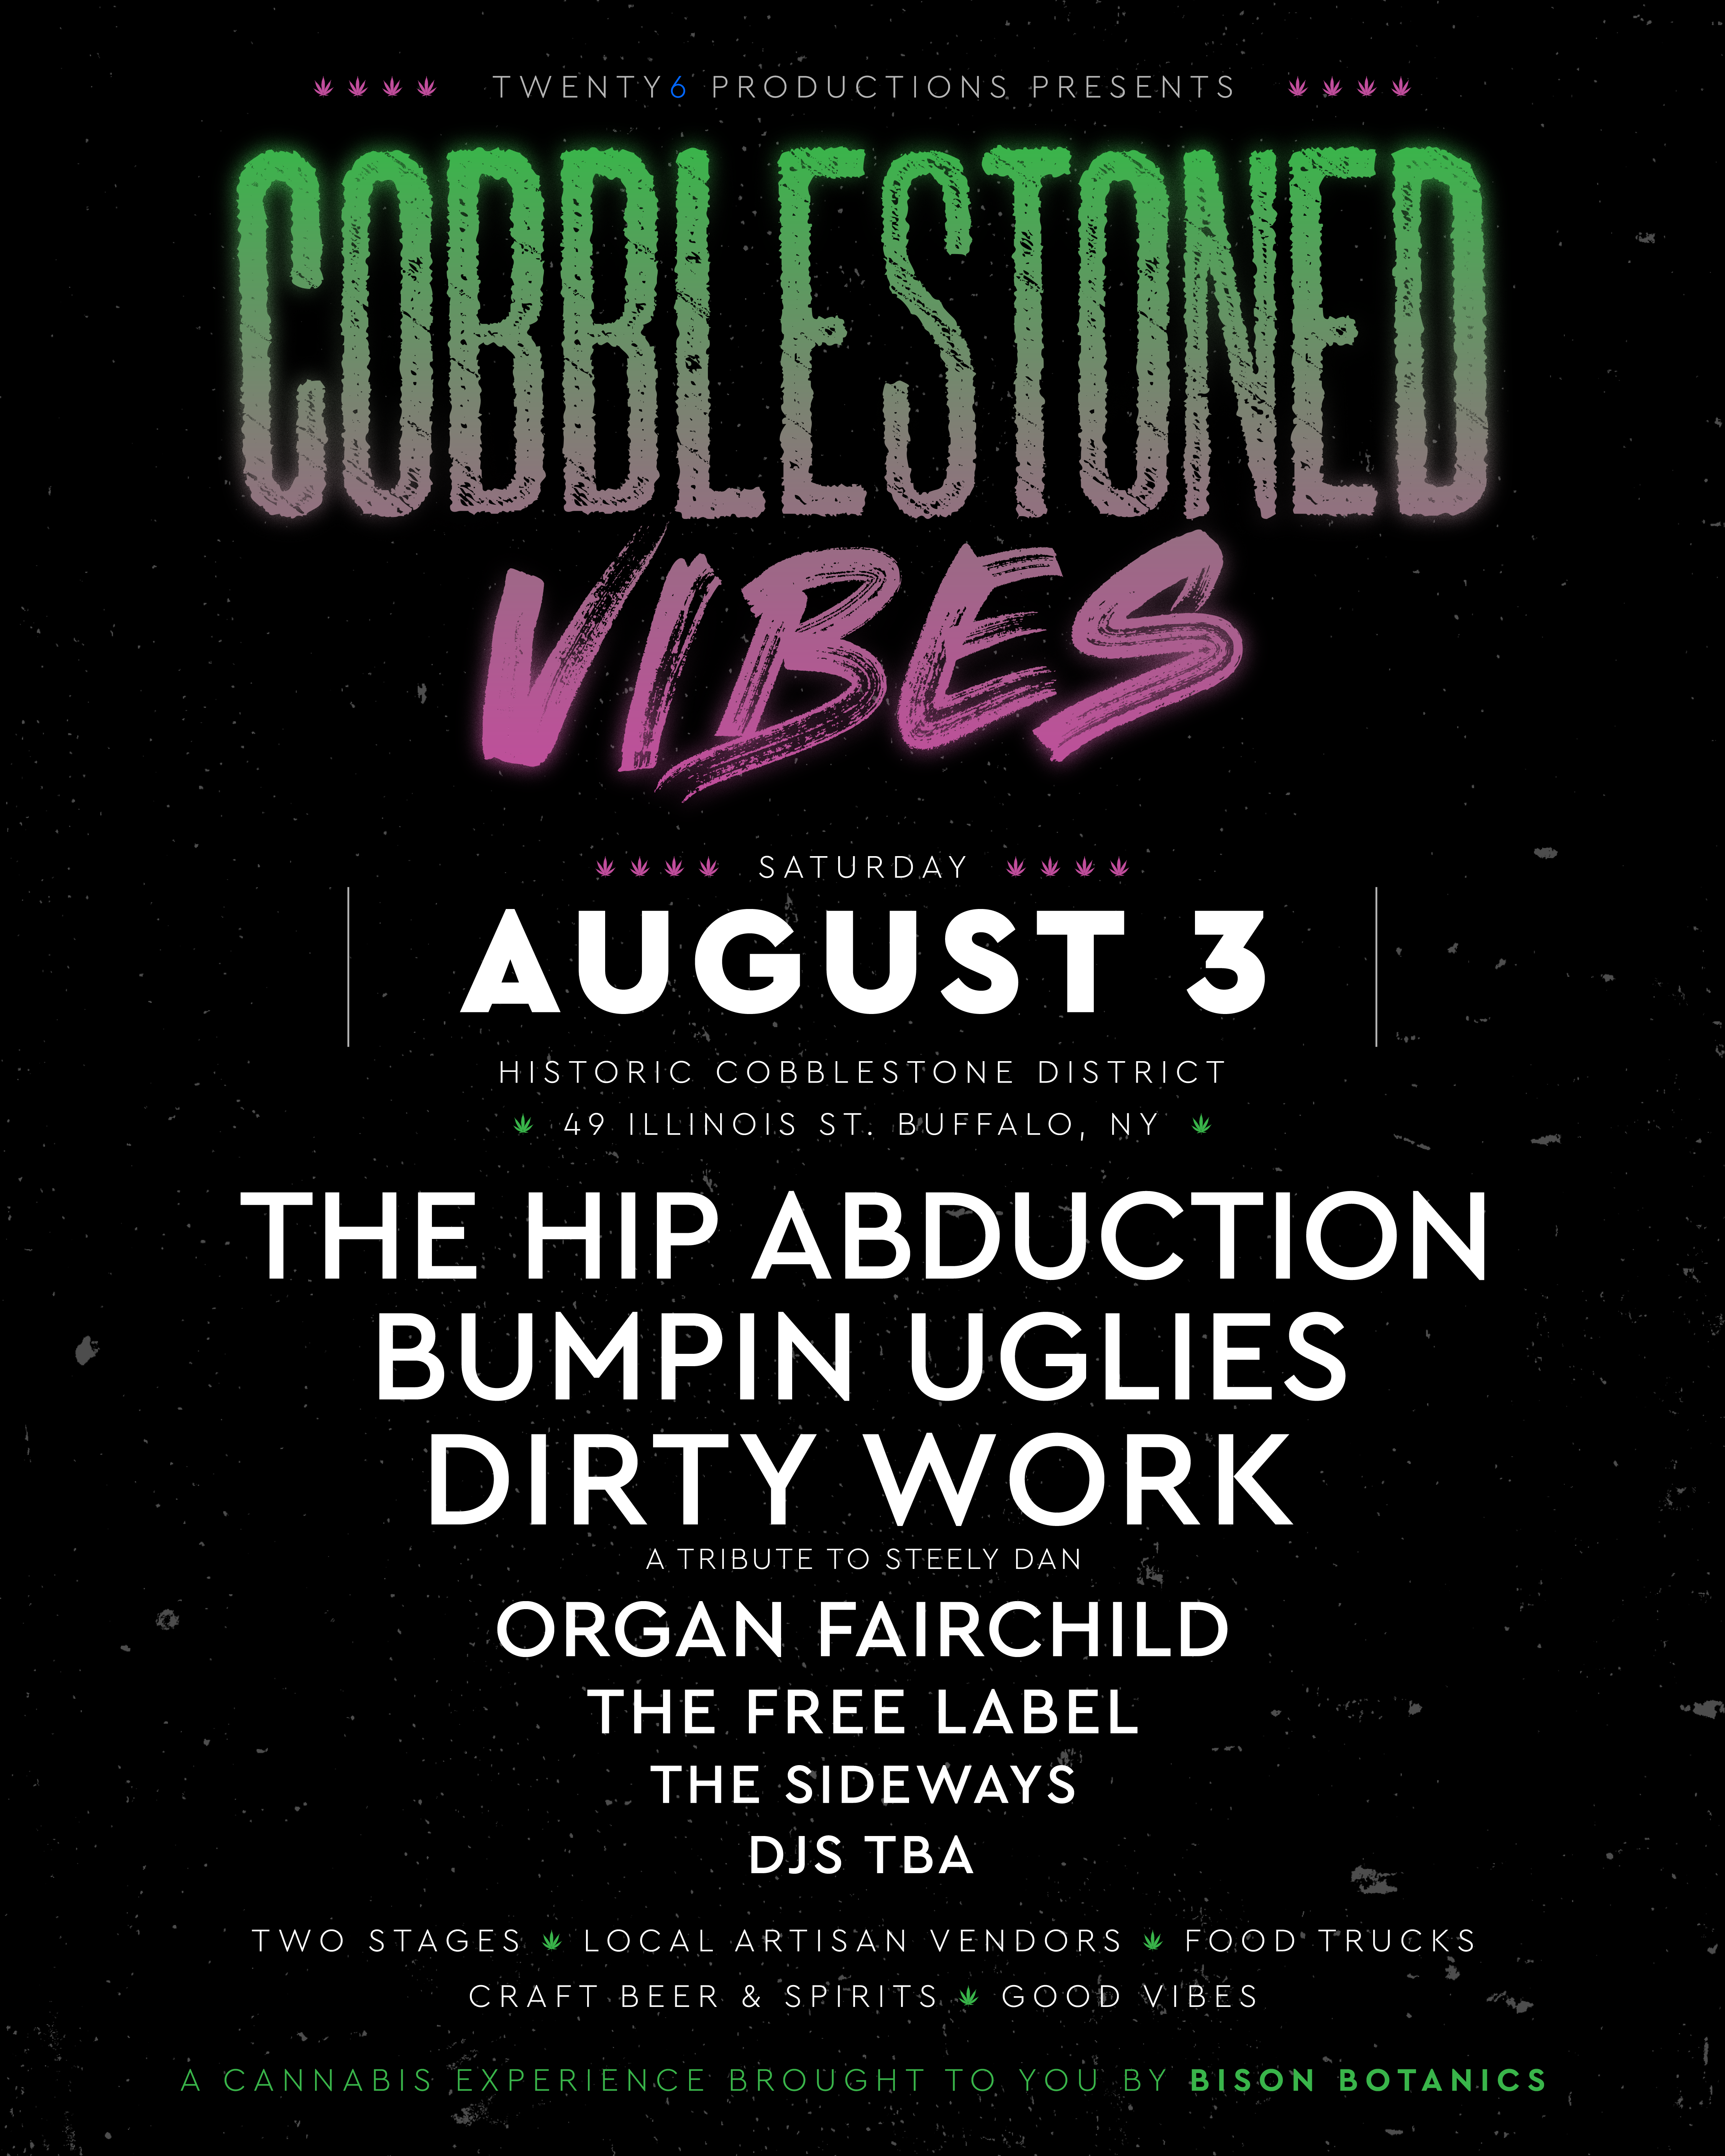 Cobblestoned Live Set for August 3rd